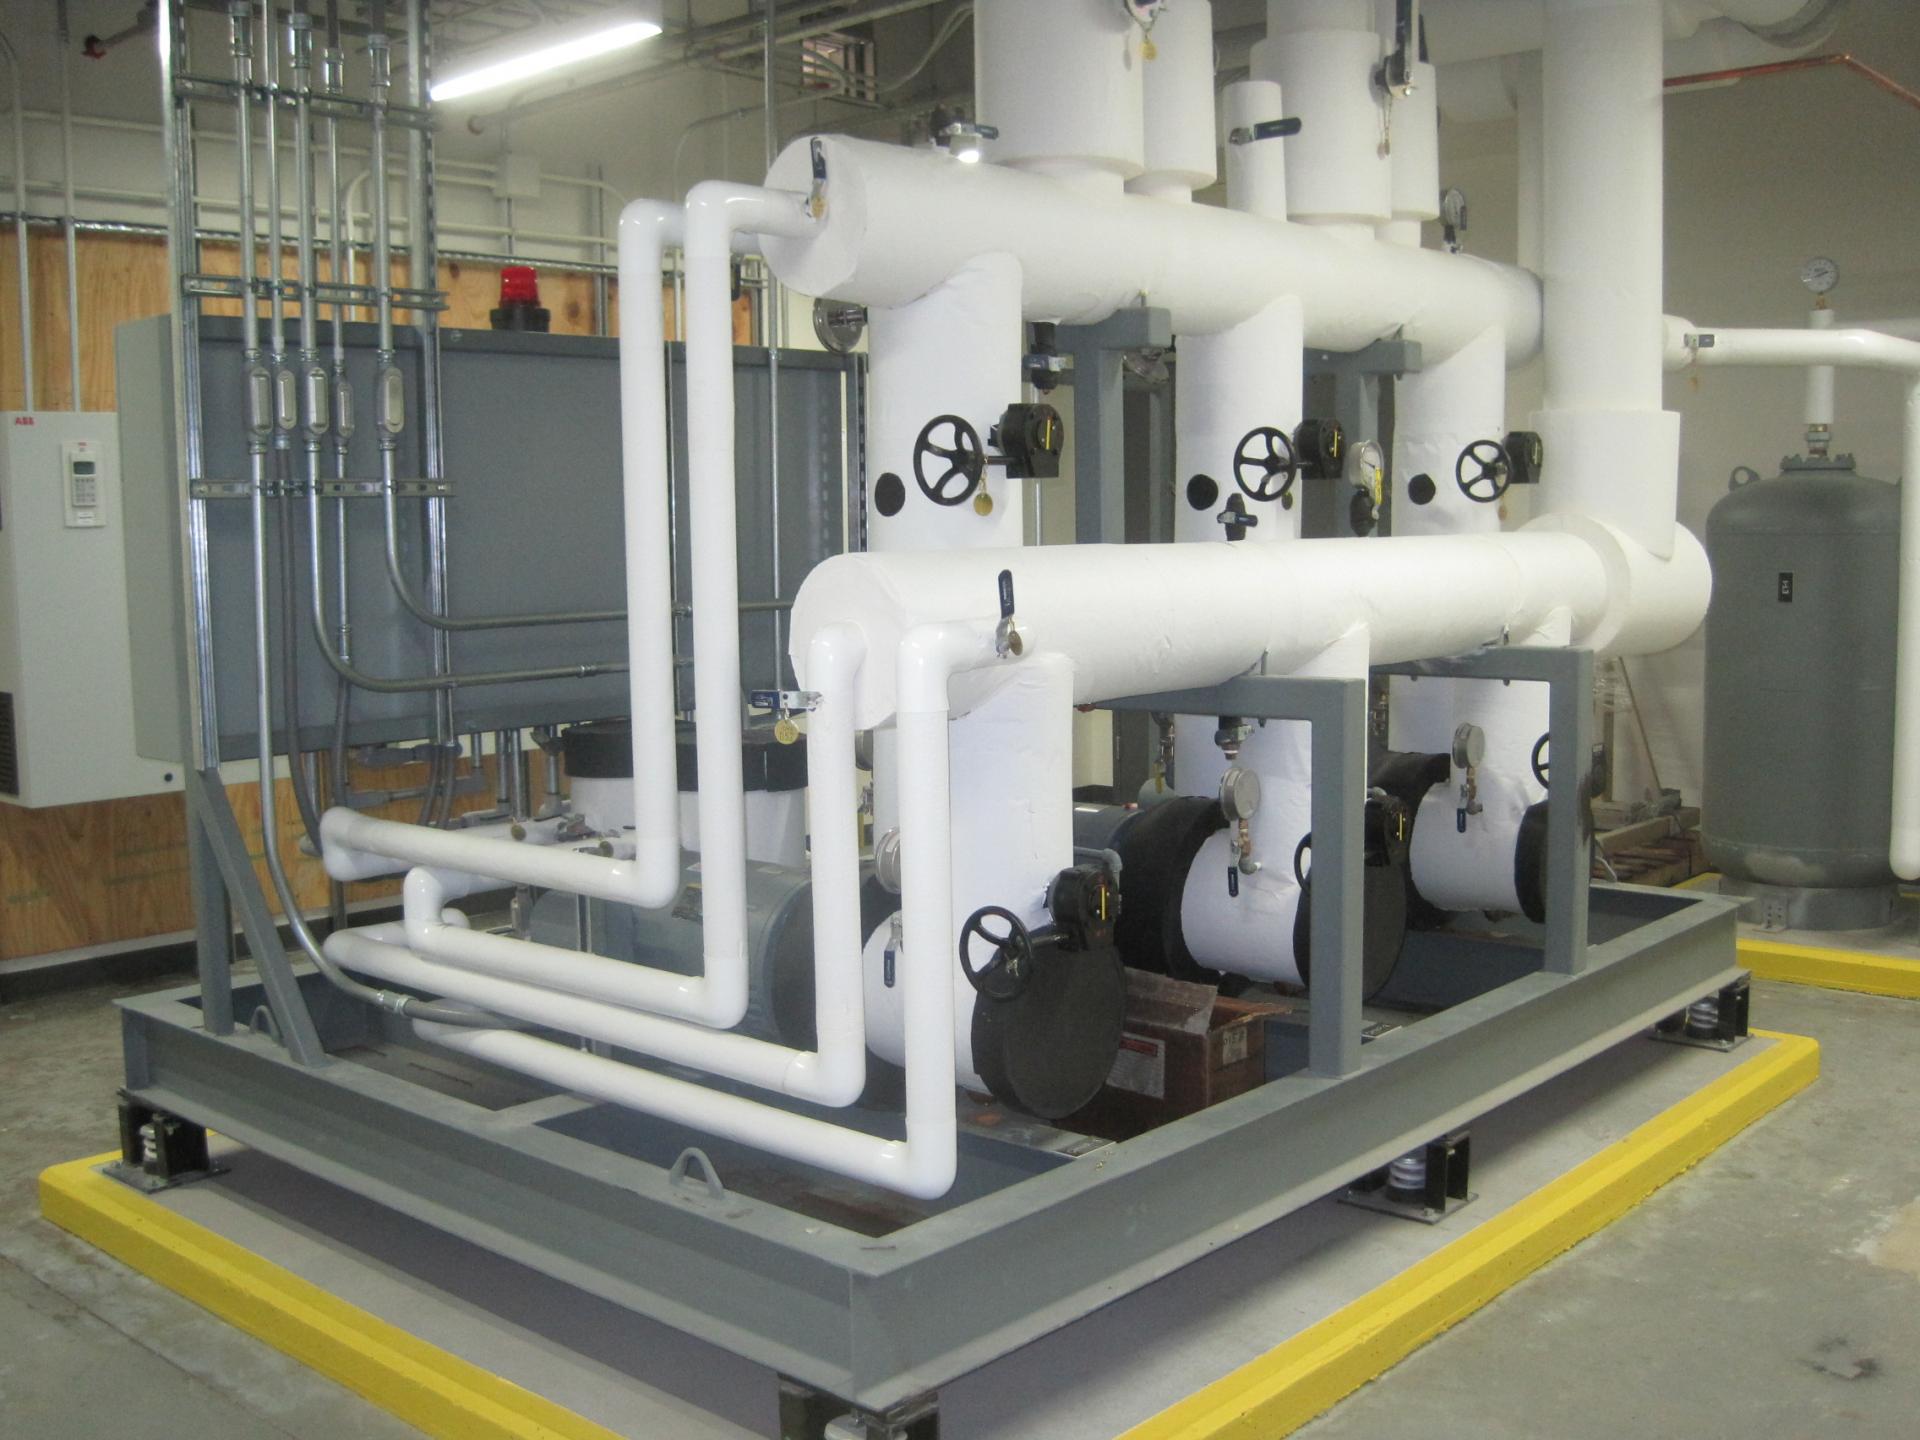 Skid mounted redundant pump package is makes efficient use of the available mechanical room space.